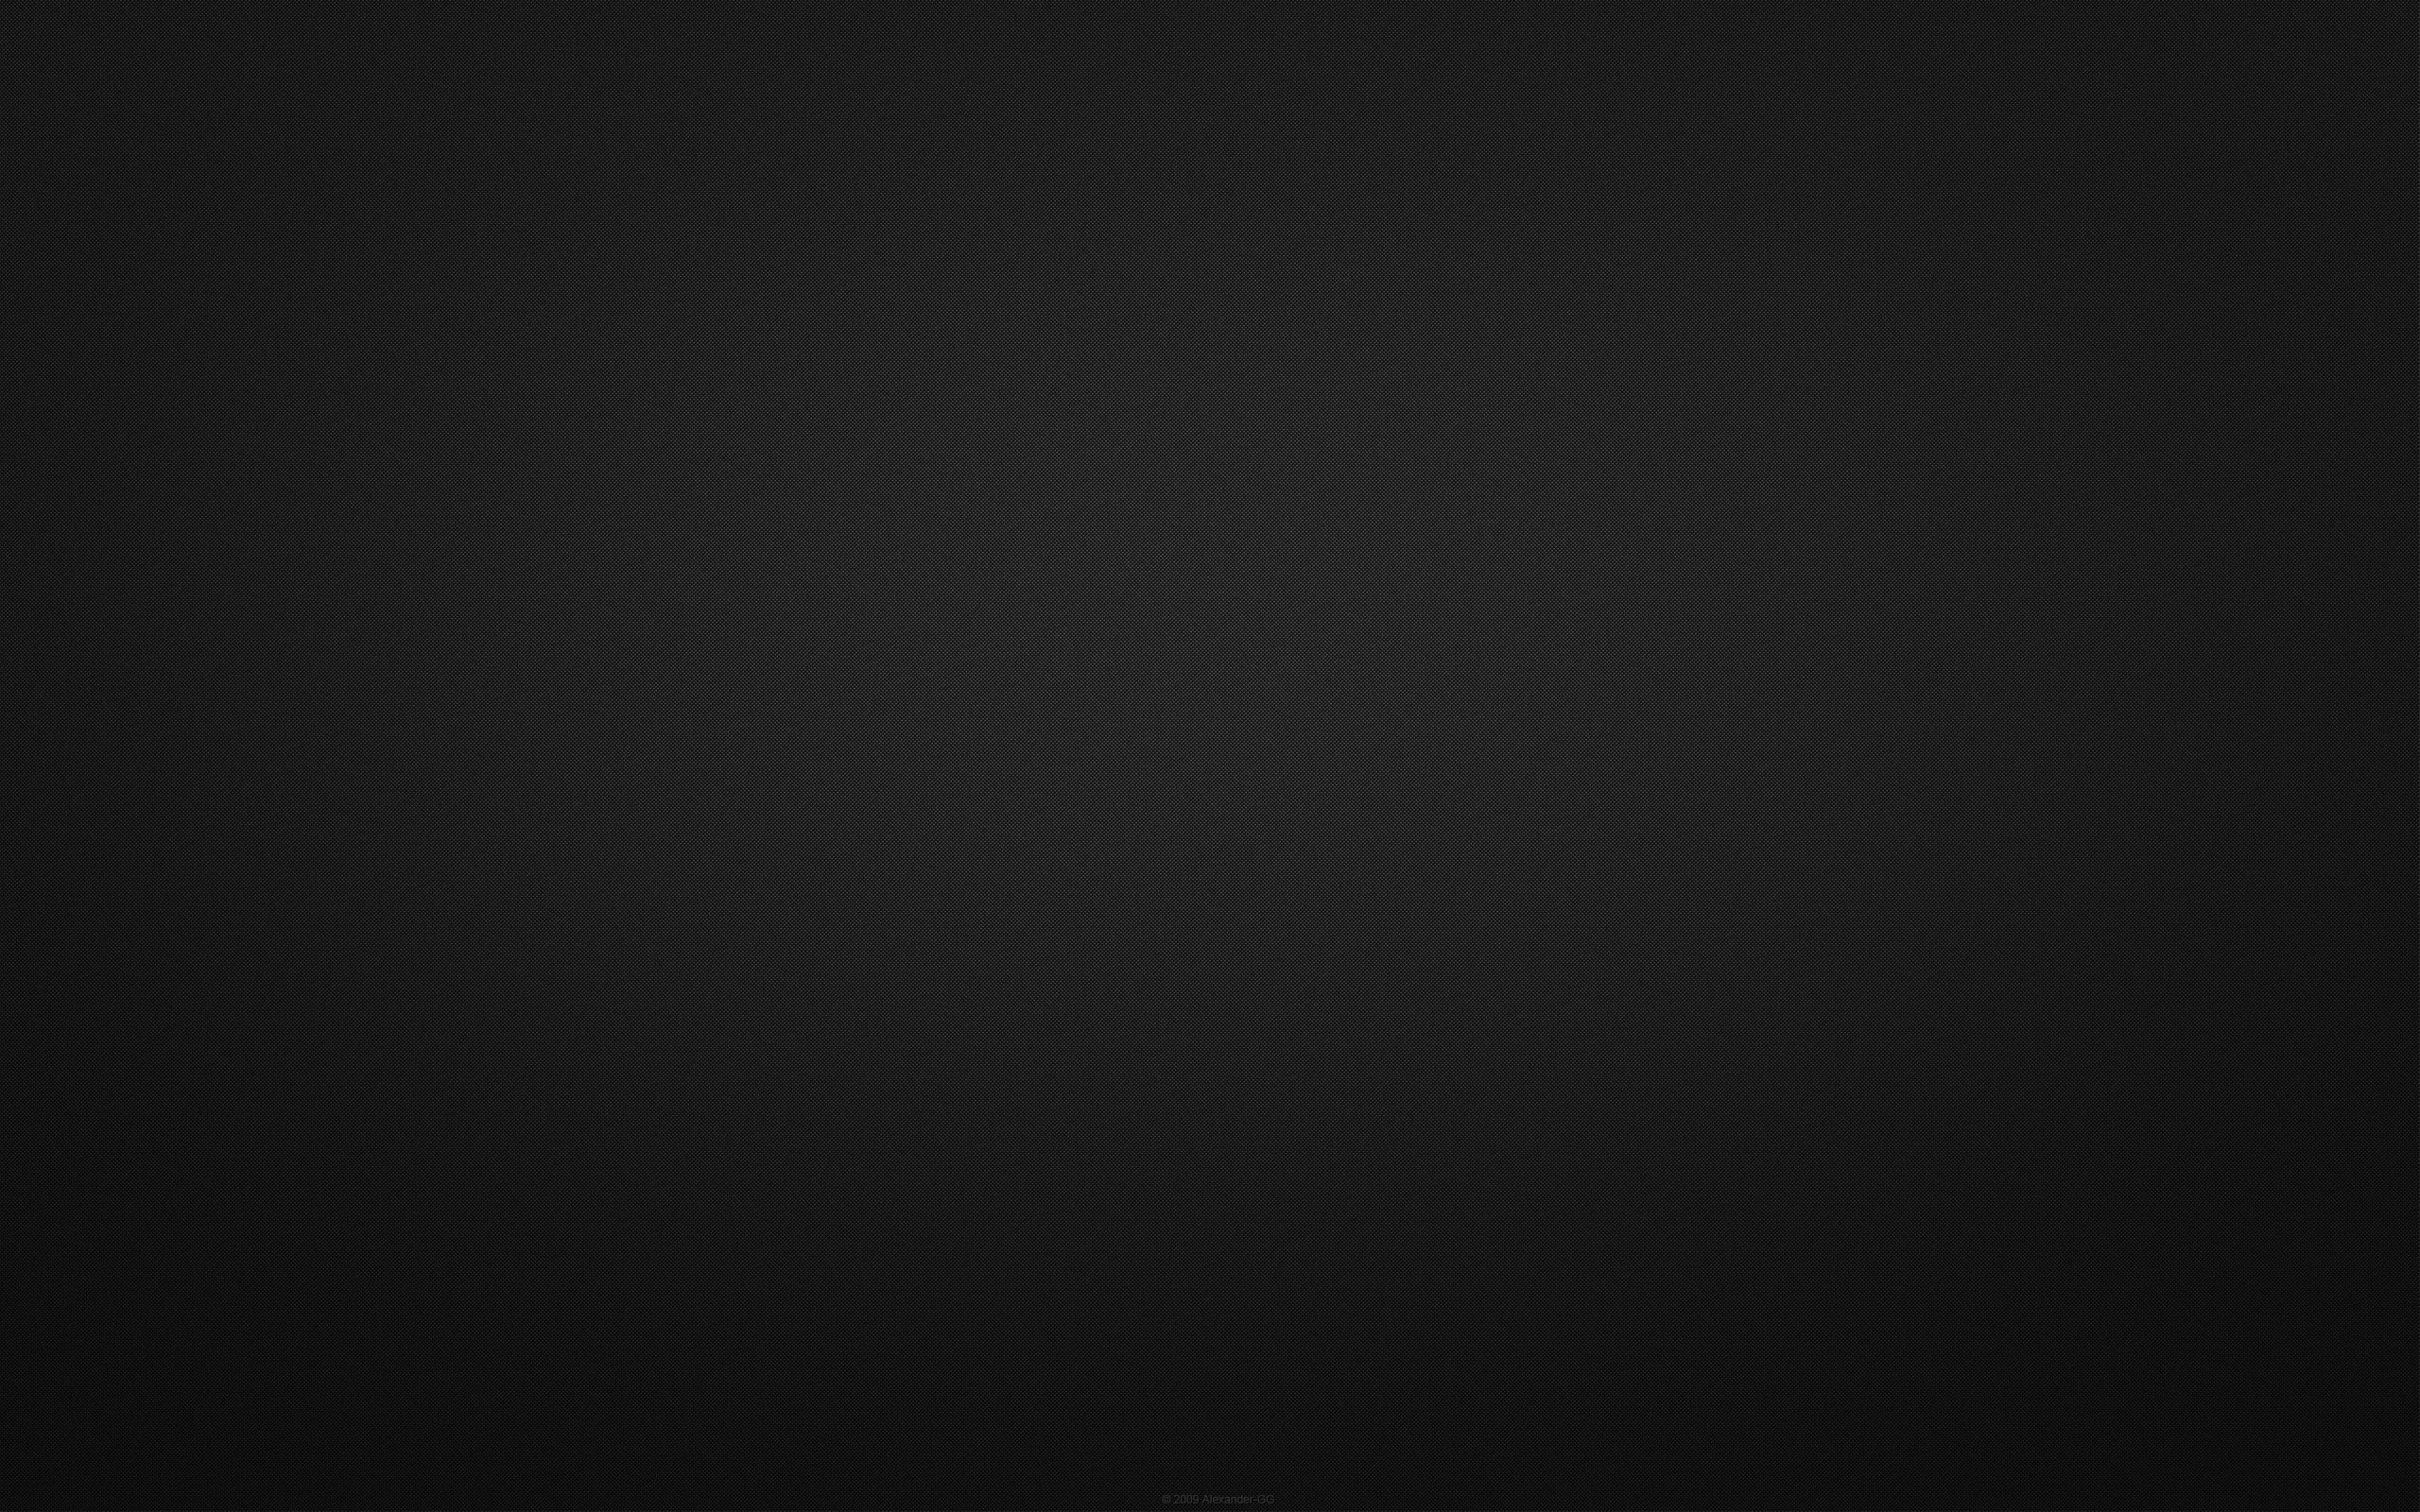 148124 download wallpaper minimalism, textures, black, texture screensavers and pictures for free